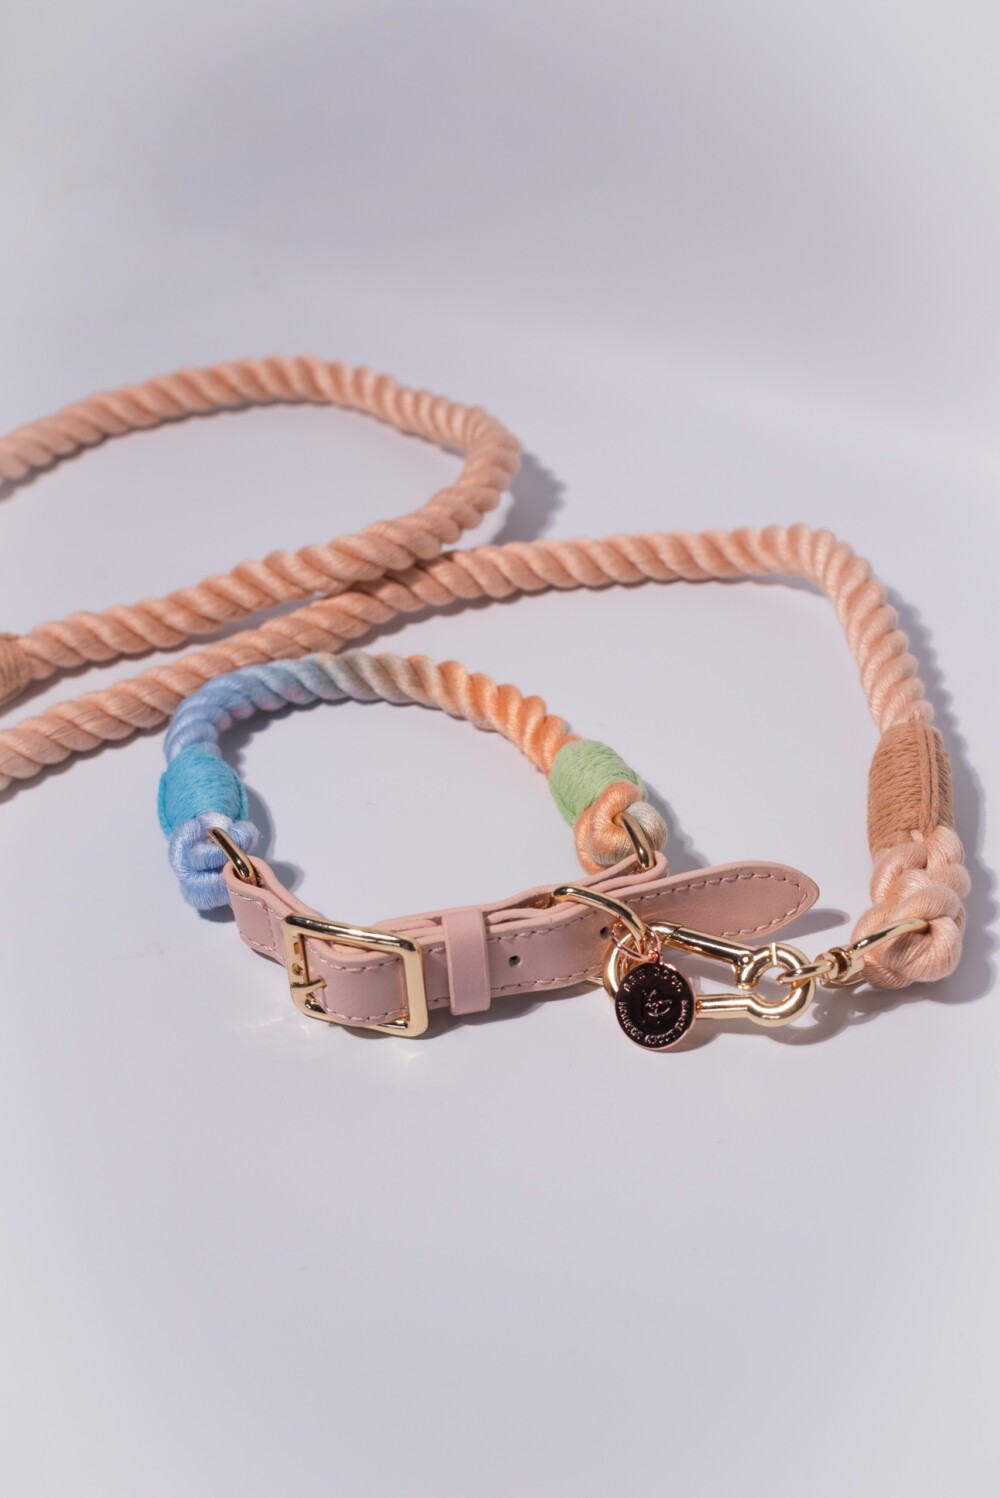 A peach rope lead and rainbow rope collar on a white background